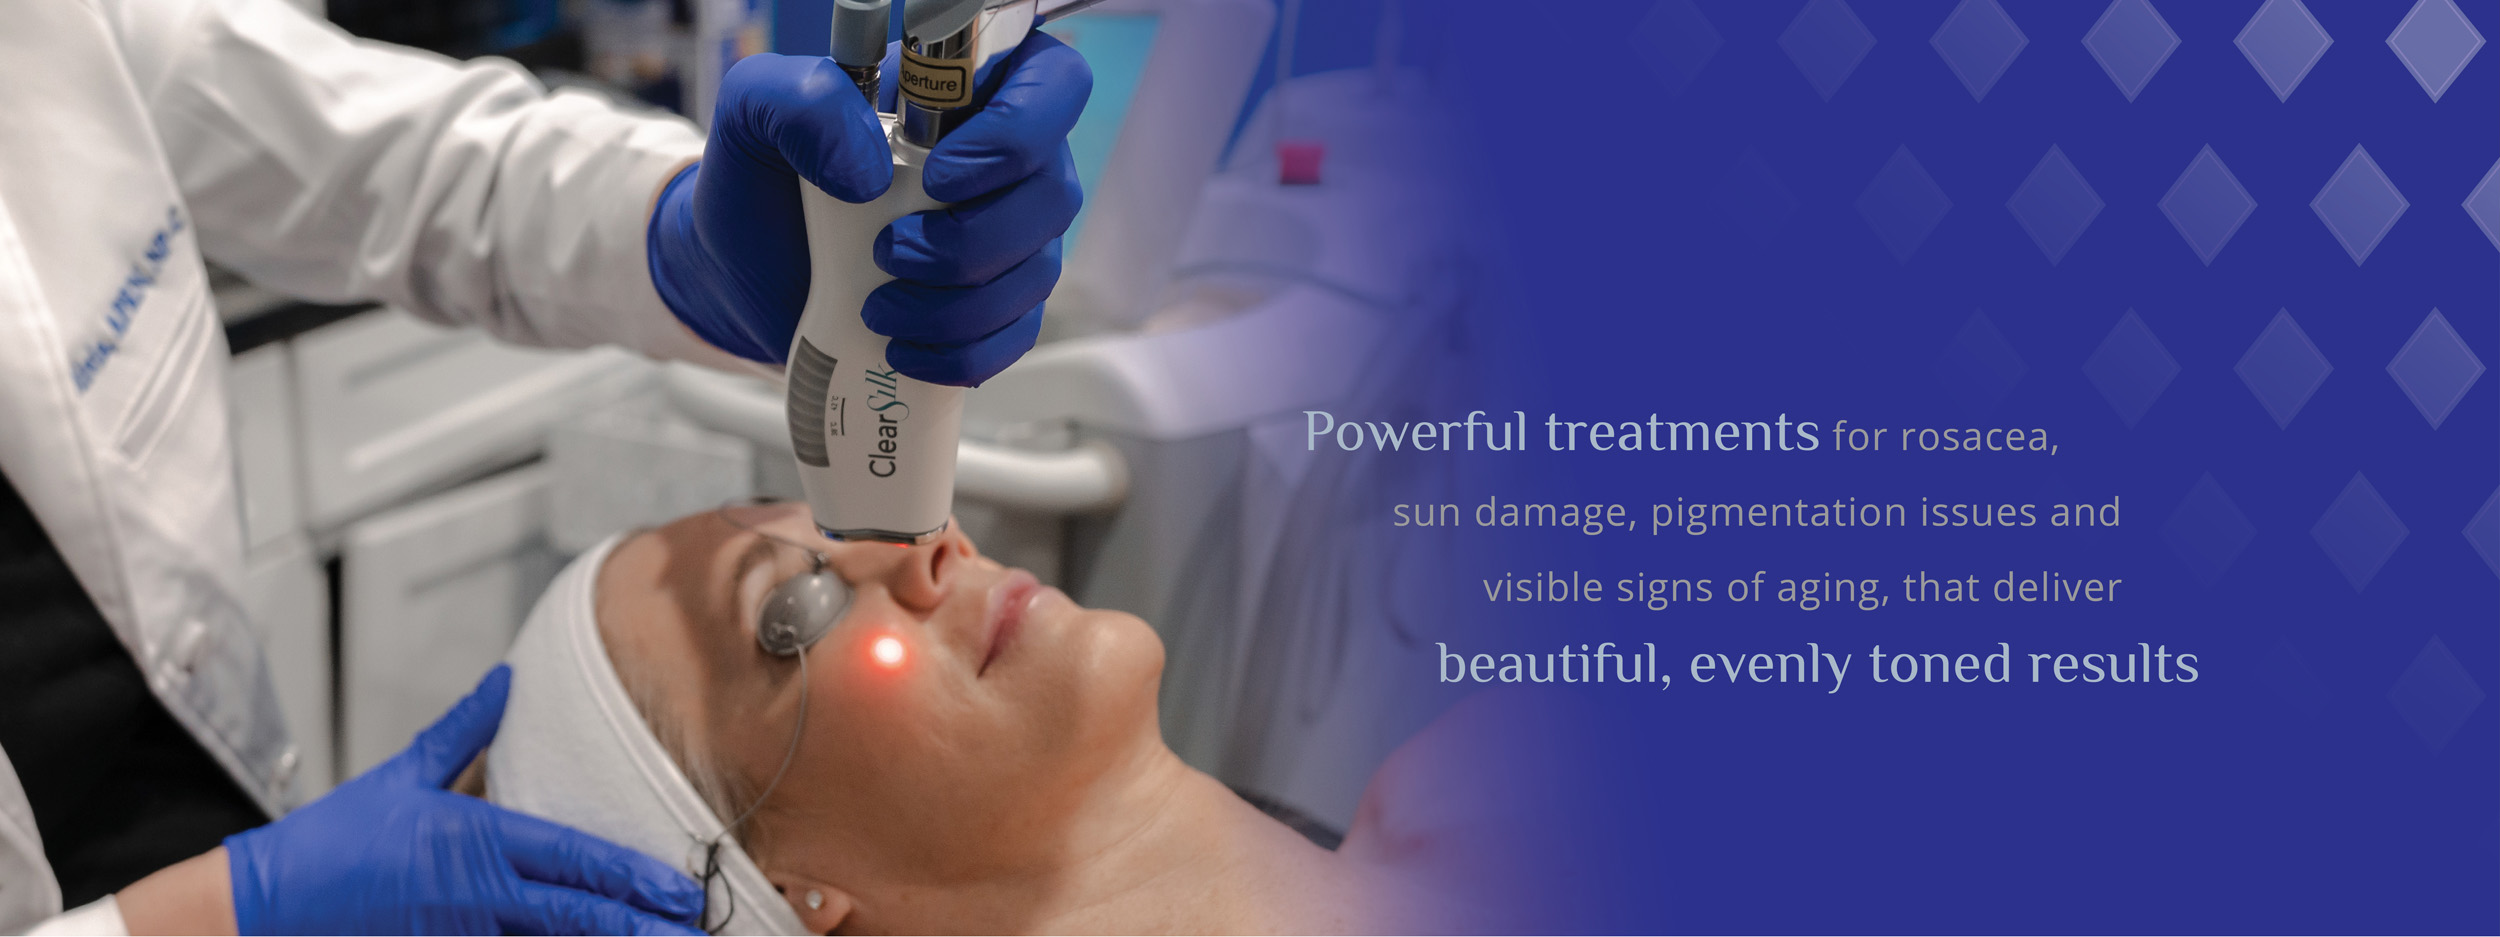 Patient receiving Laser Rejuvenation facial treatments from NeoSkin Medical Spa in Hudson Ohio